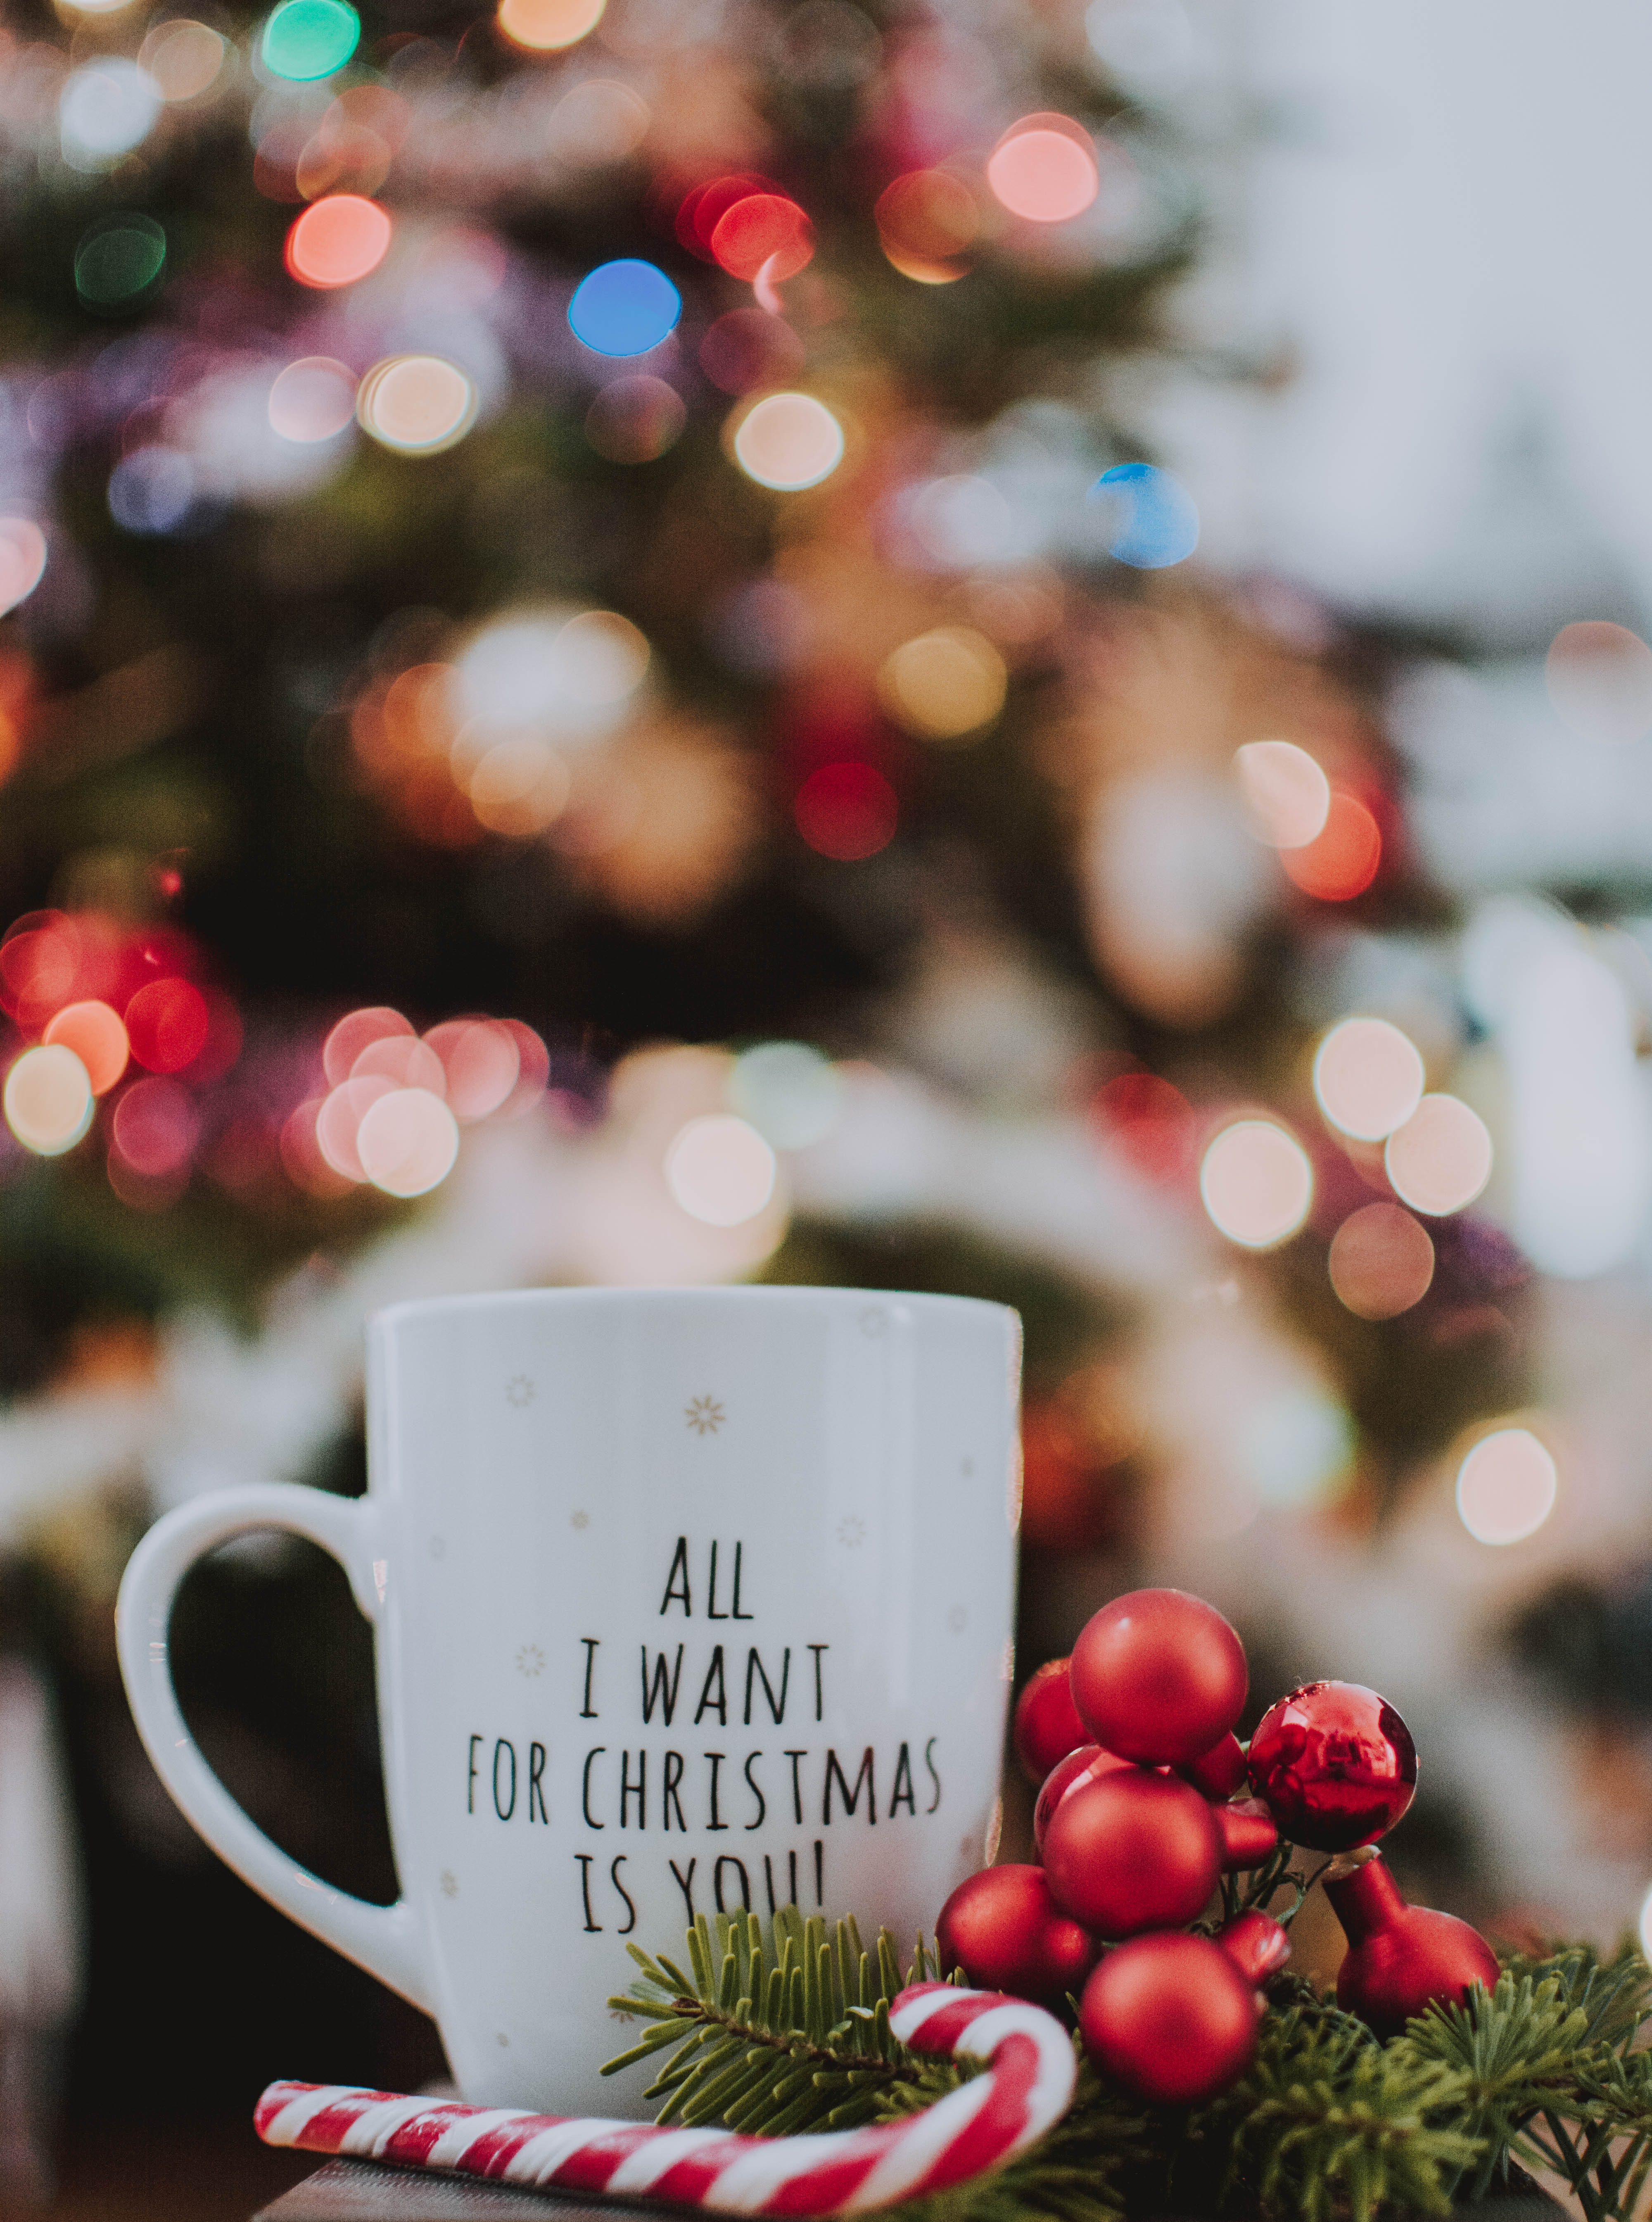 83944 download wallpaper christmas, holidays, new year, glare, cup, inscription, bokeh, boquet, mug screensavers and pictures for free